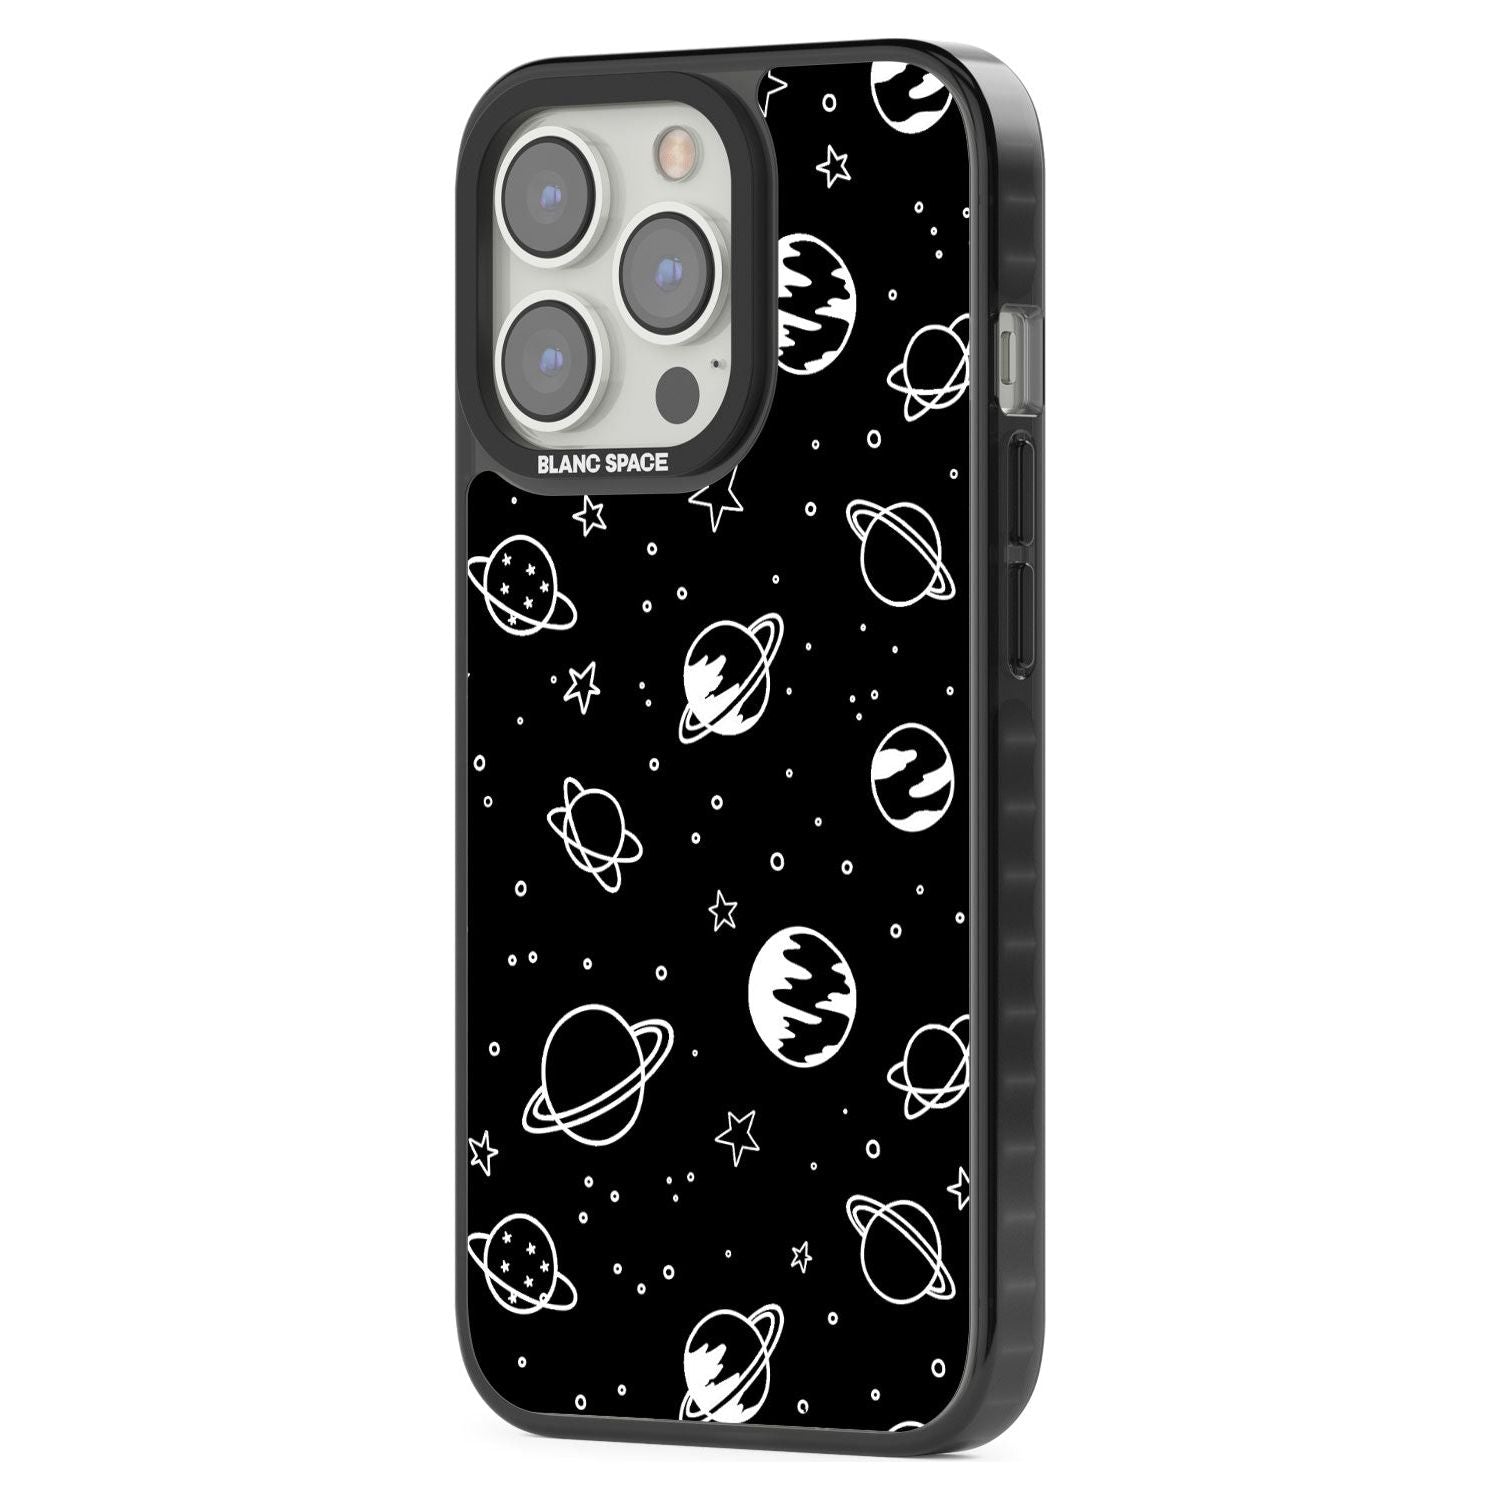 Cosmic Outer Space Design White on Black Phone Case iPhone 15 Pro Max / Black Impact Case,iPhone 15 Plus / Black Impact Case,iPhone 15 Pro / Black Impact Case,iPhone 15 / Black Impact Case,iPhone 15 Pro Max / Impact Case,iPhone 15 Plus / Impact Case,iPhone 15 Pro / Impact Case,iPhone 15 / Impact Case,iPhone 15 Pro Max / Magsafe Black Impact Case,iPhone 15 Plus / Magsafe Black Impact Case,iPhone 15 Pro / Magsafe Black Impact Case,iPhone 15 / Magsafe Black Impact Case,iPhone 14 Pro Max / Black Impact Case,iPh